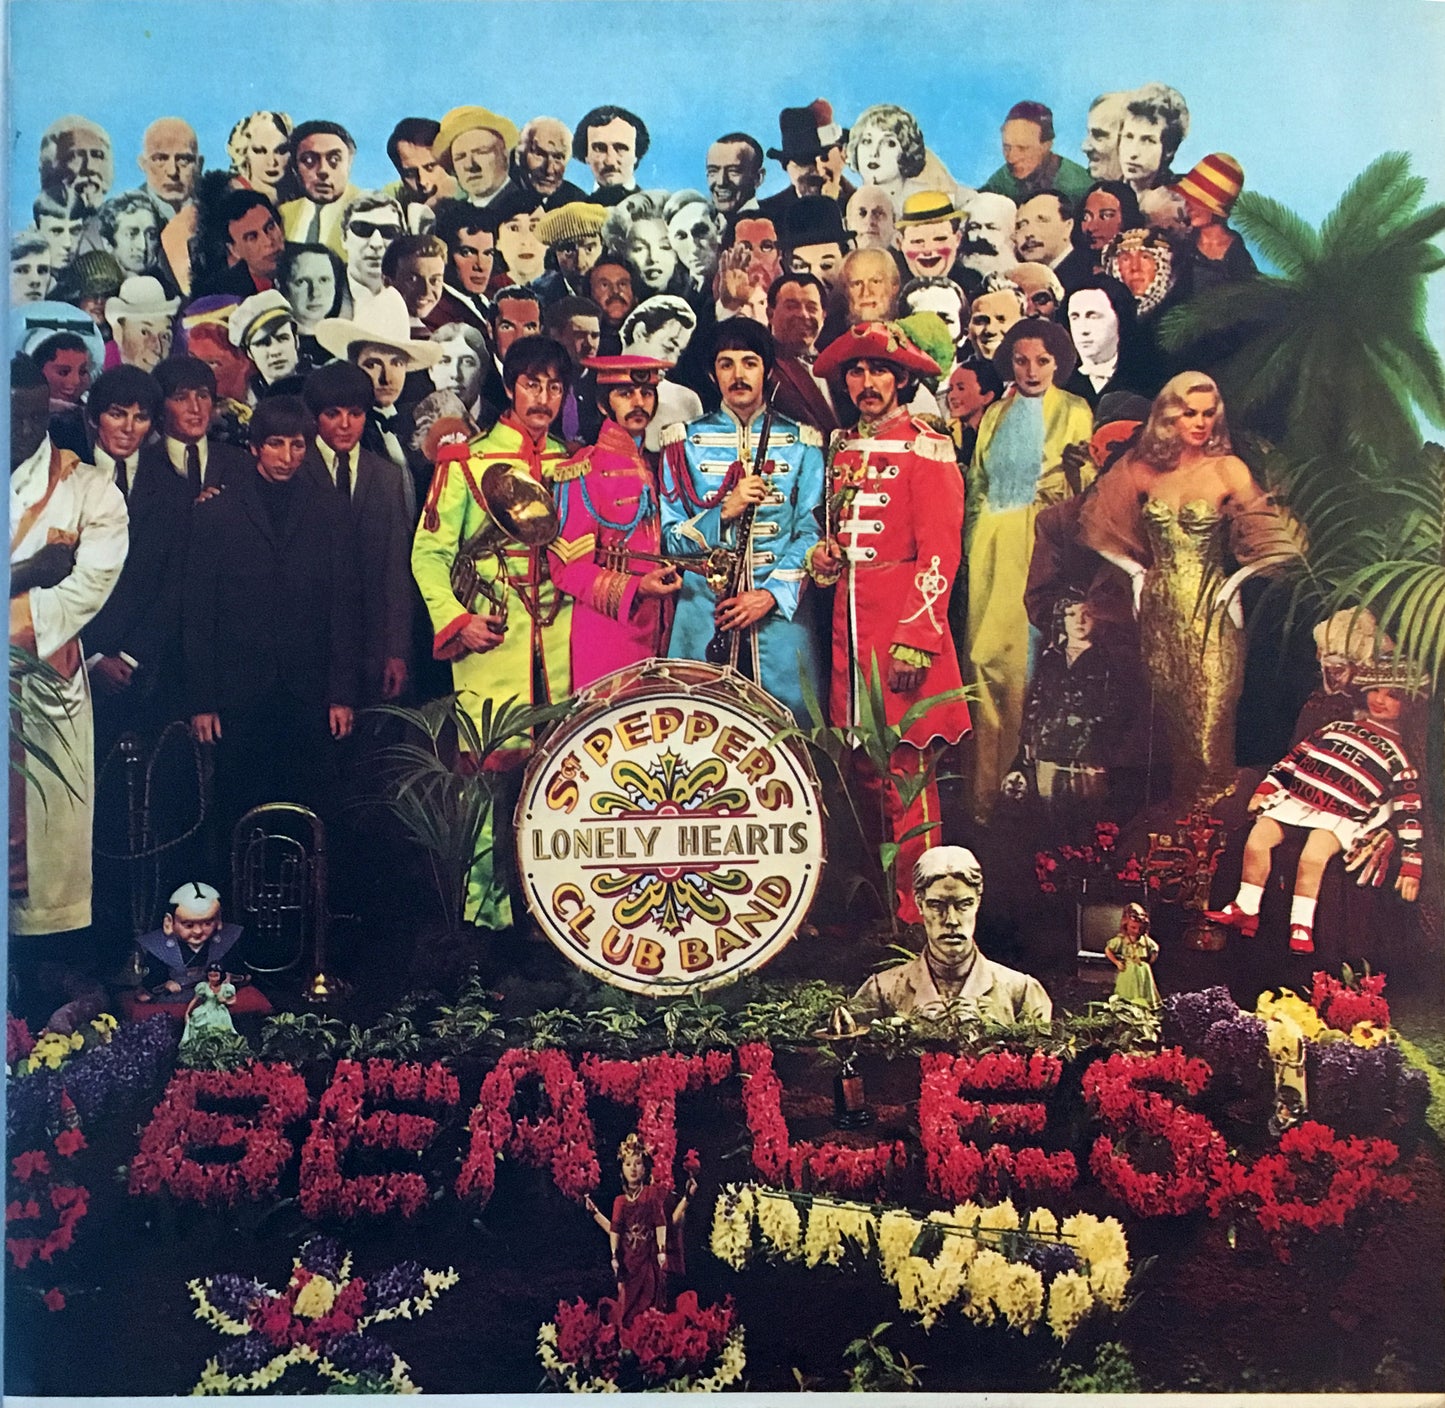 THE BEATLES - SGT. PEPPER'S LONELY HEARTS CLUB BAND